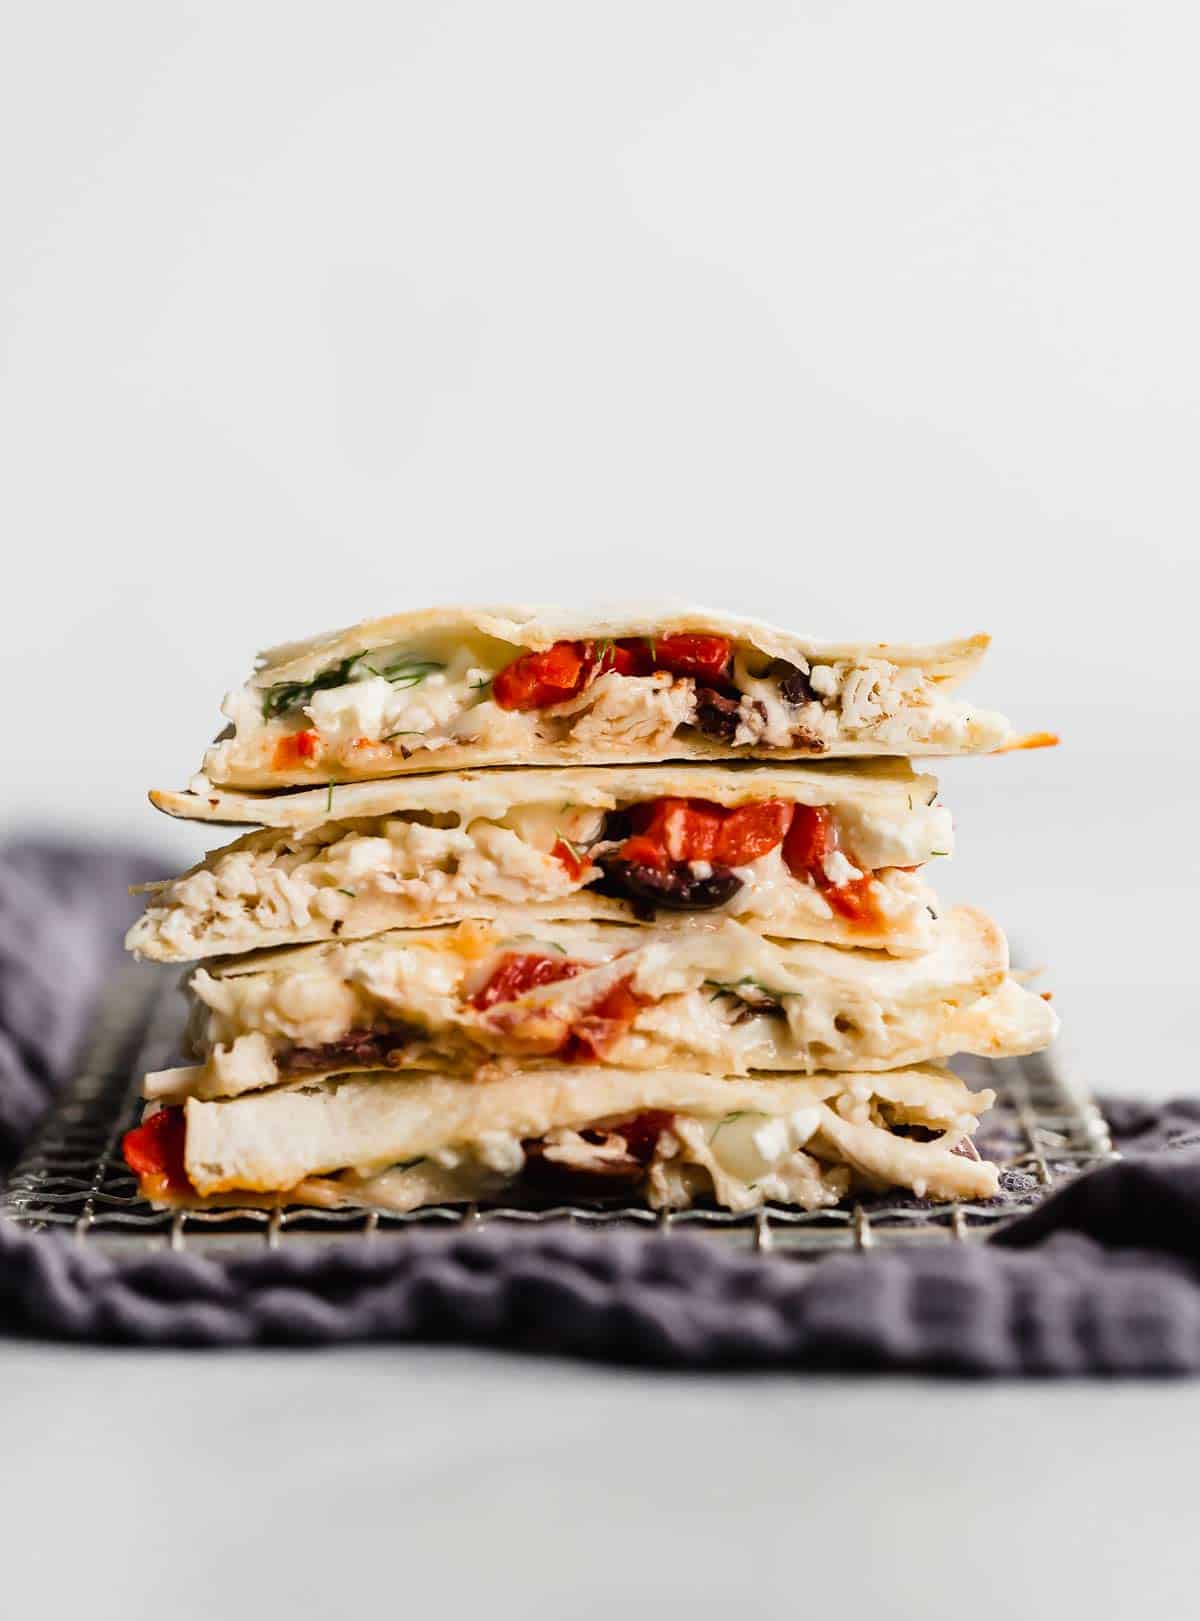 A Greek Quesadilla cut into quarters and stacked on top of each other against a white background.